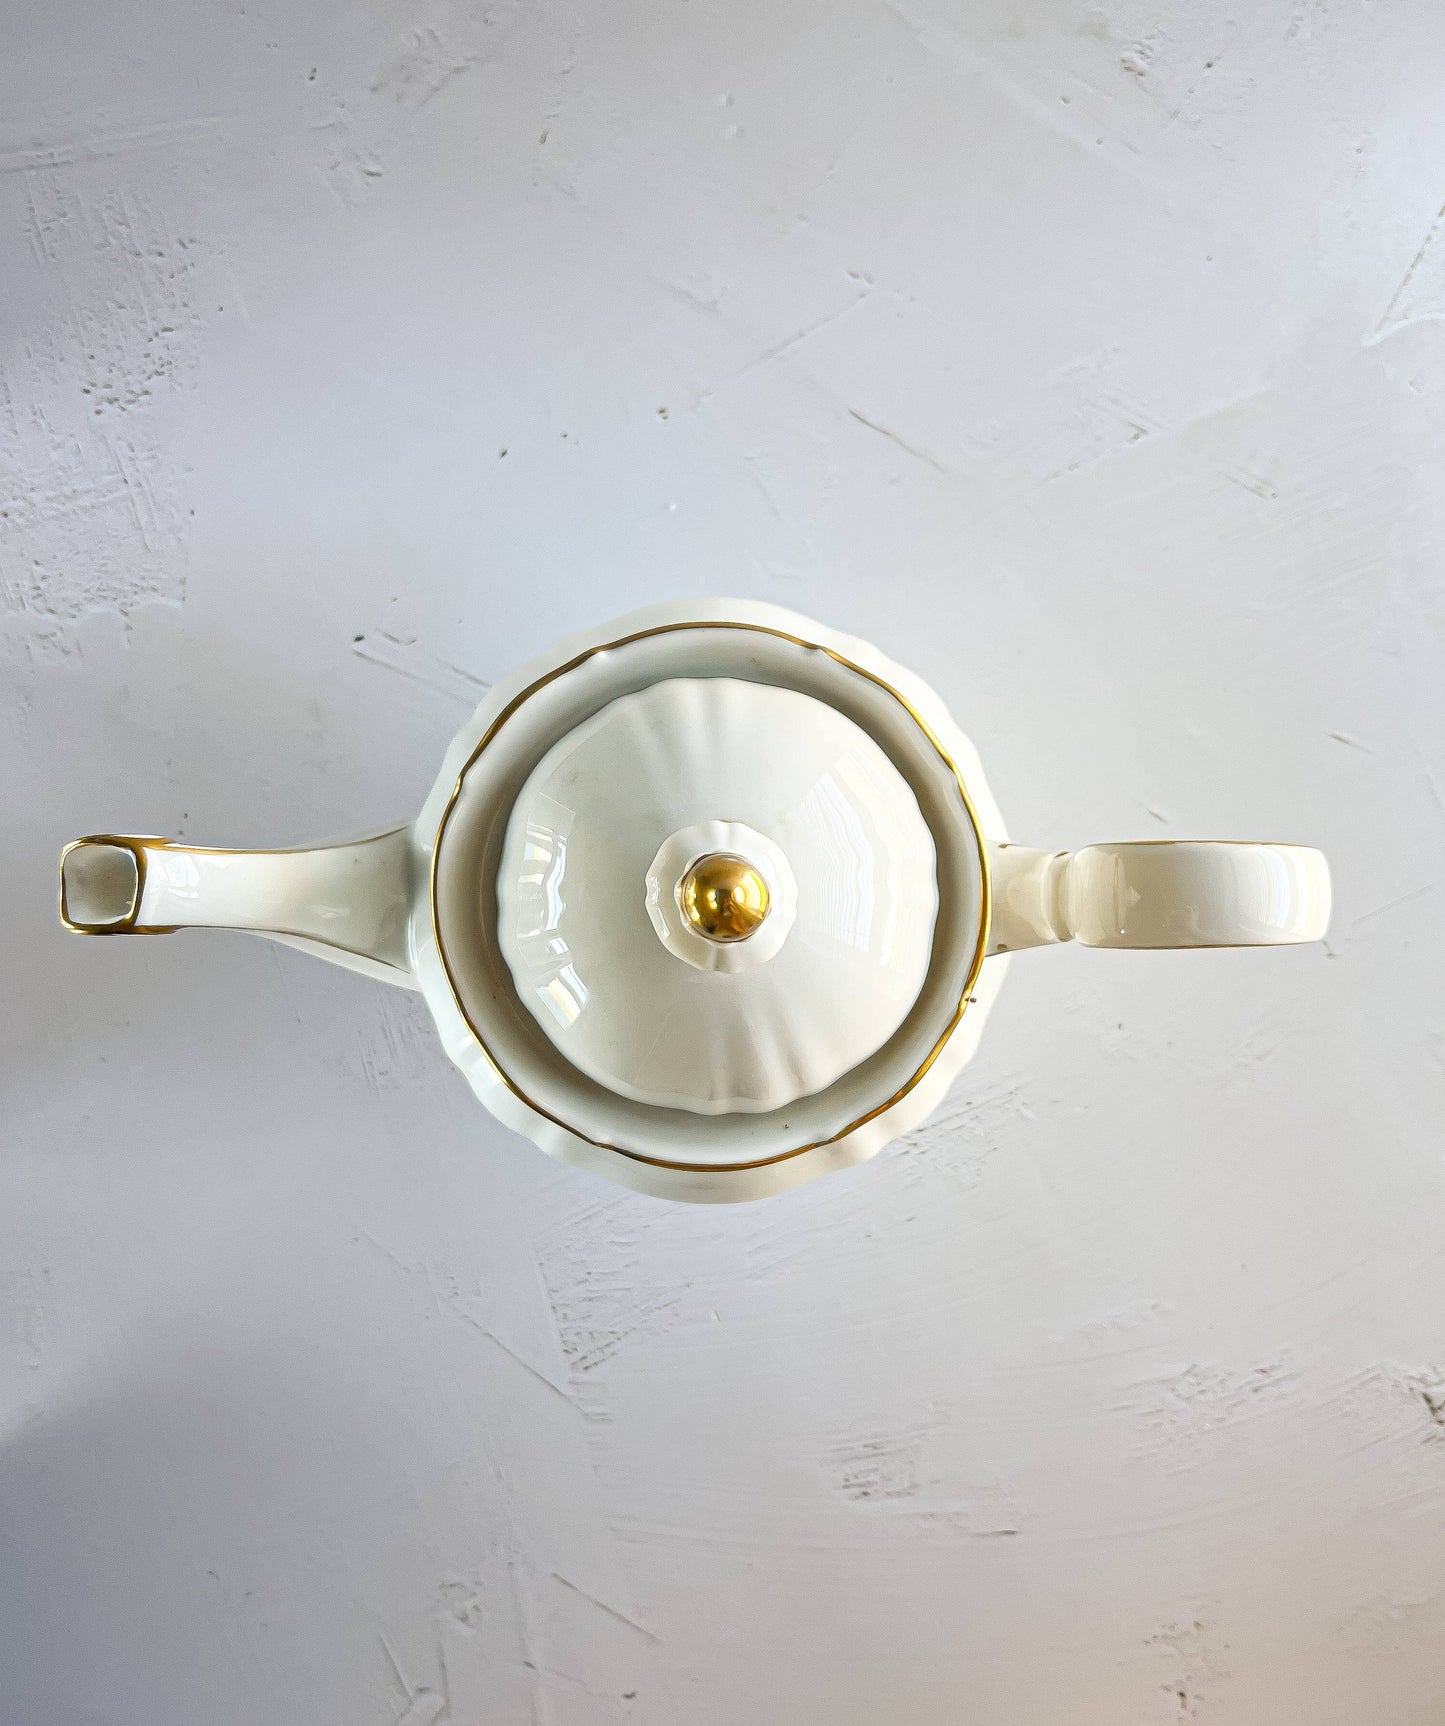 Hutschenreuther Teapot with Gold Trim - 'Brighton' Collection